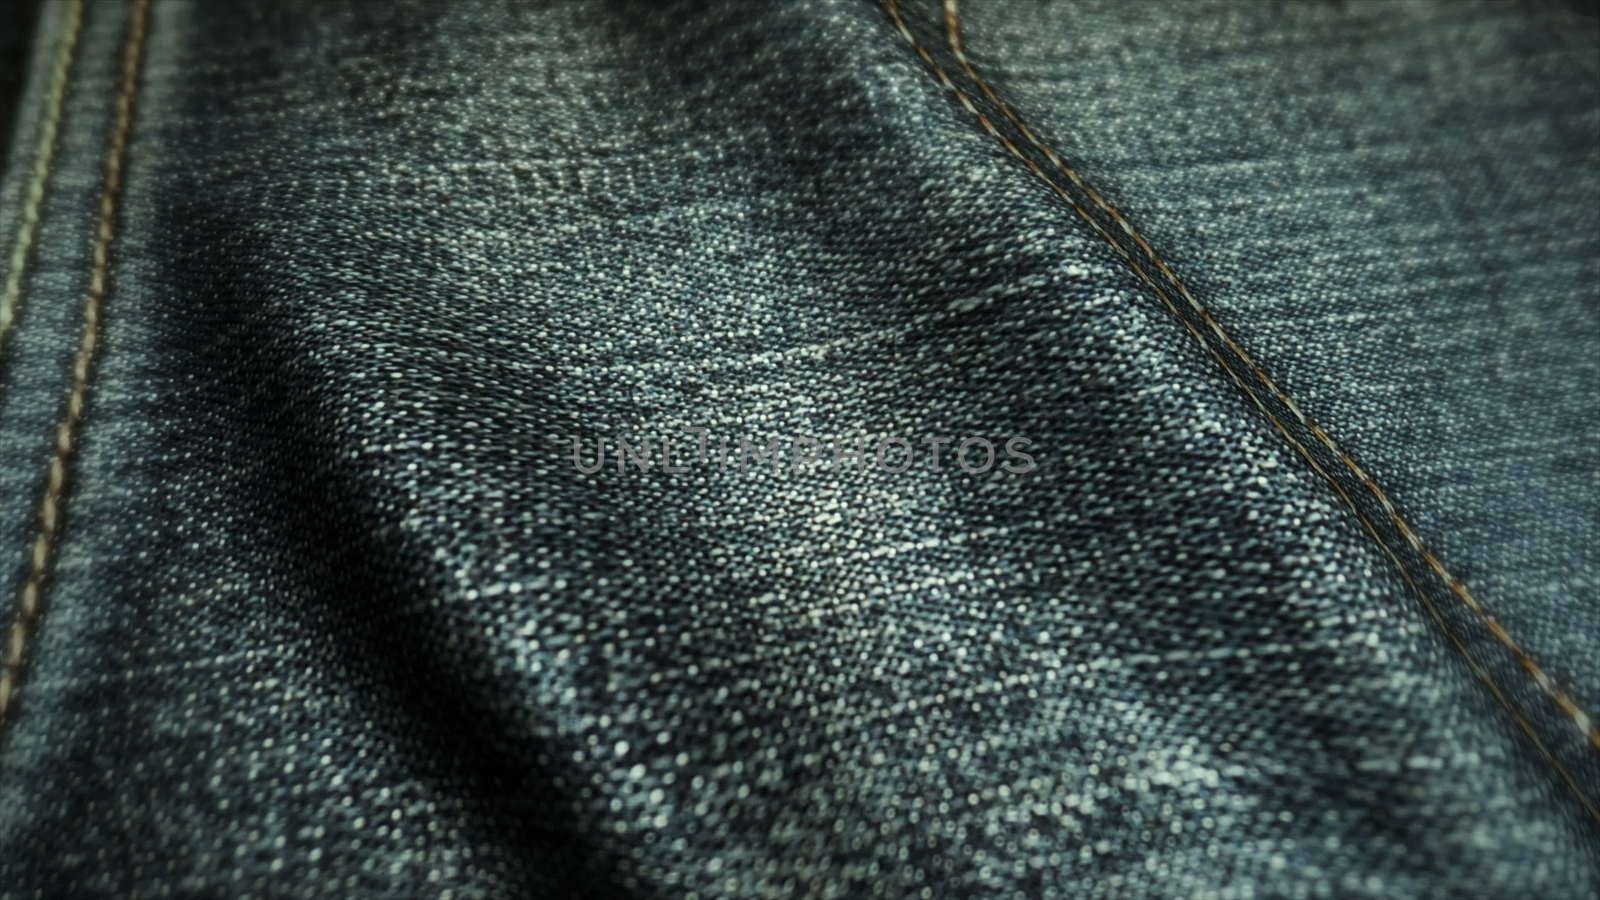 Realistic jeans waving in the wind. Abstract background Ultra-HD resolution. Close-up fabric texture. Seamless loop by nolimit046